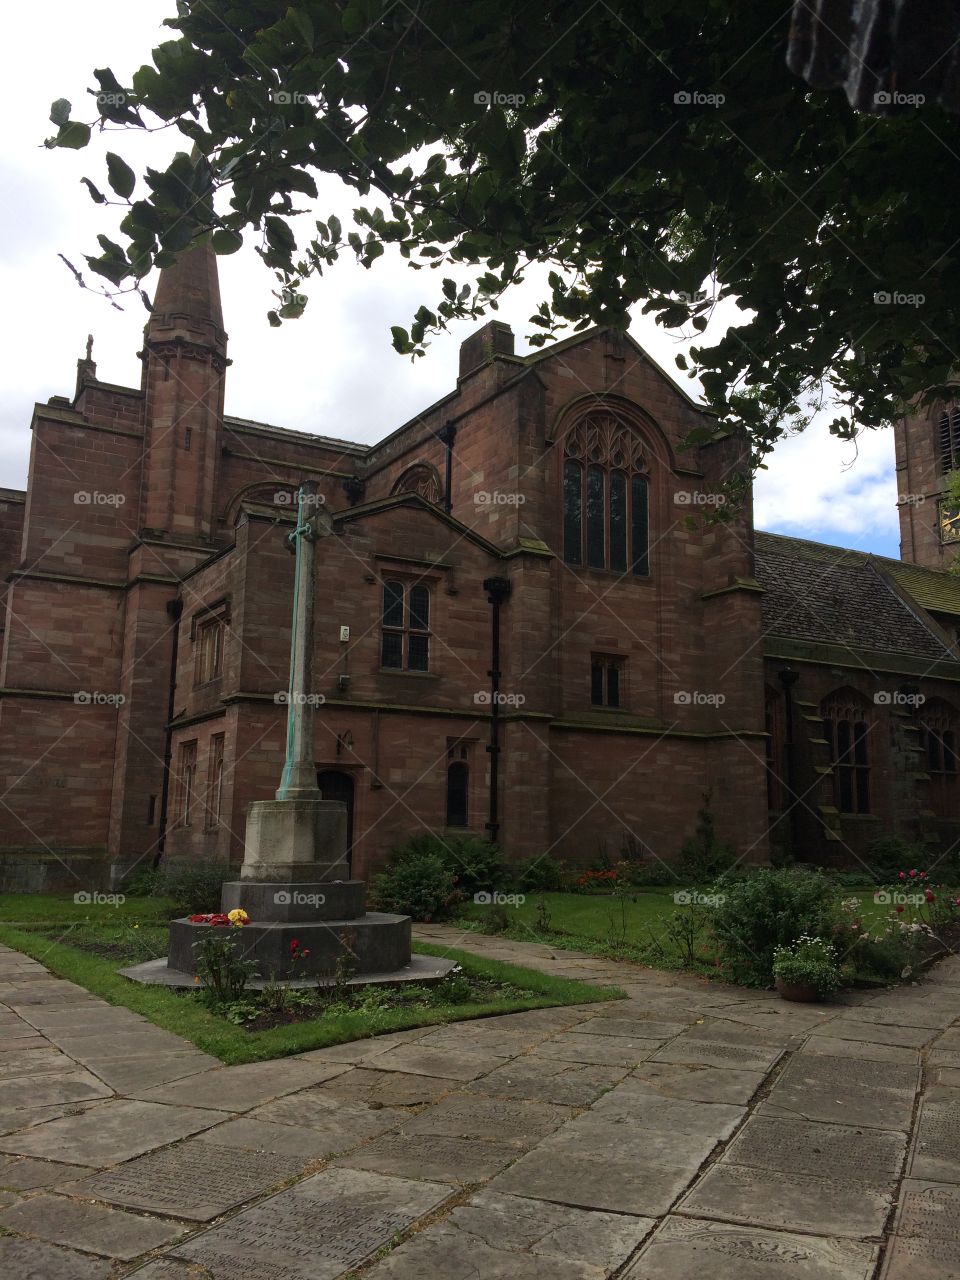 Famous St Mary's Church used in UK Coronation Street